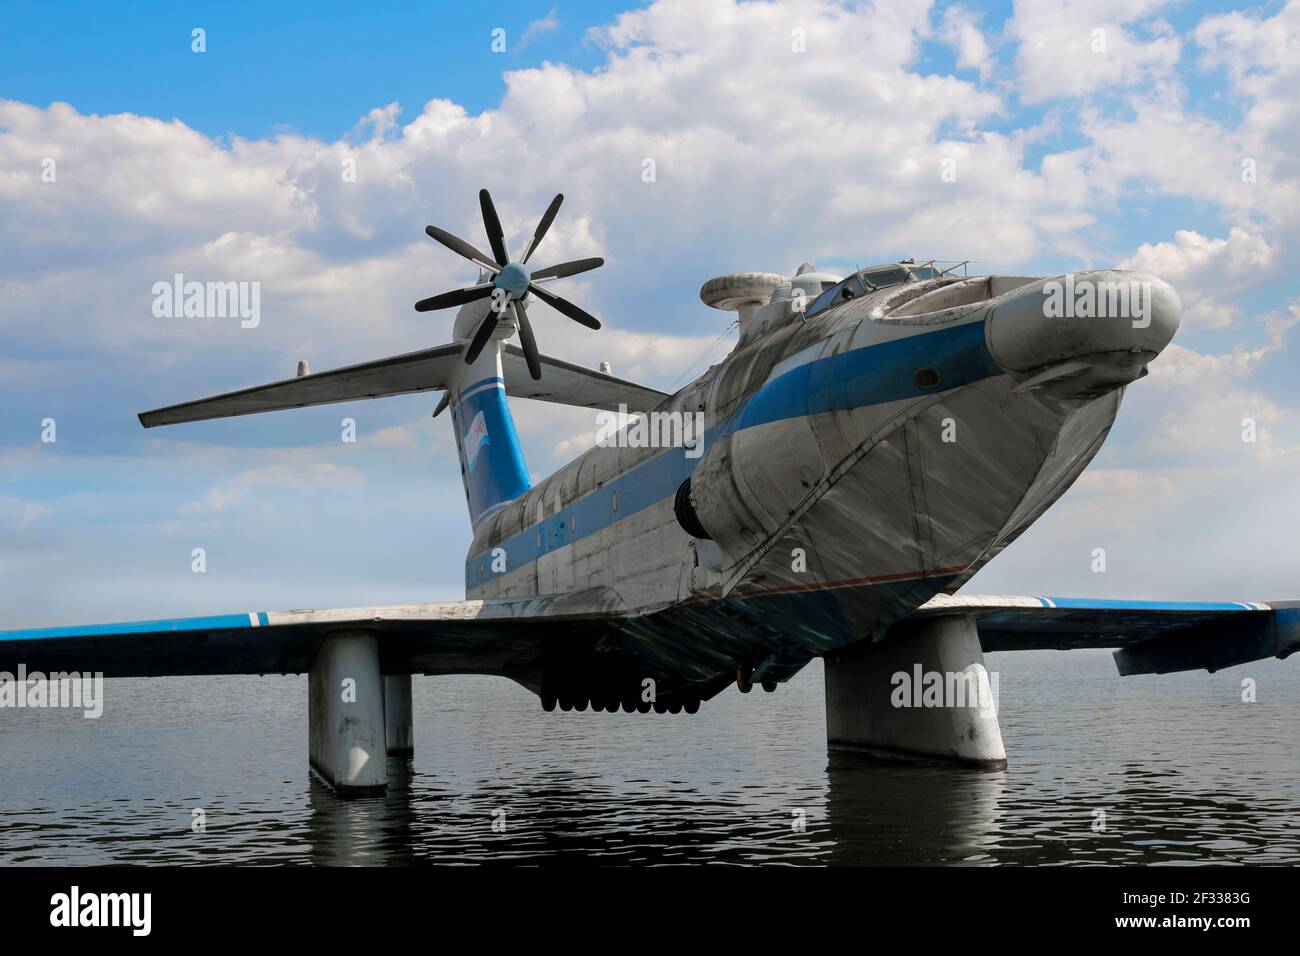 Soviet Navy A-90 Orlyonok eaglet, a ground effect aircraft designed in the 1960s by the Central Hydrofoil Design Bureau. Only 4 were built. Stock Photo